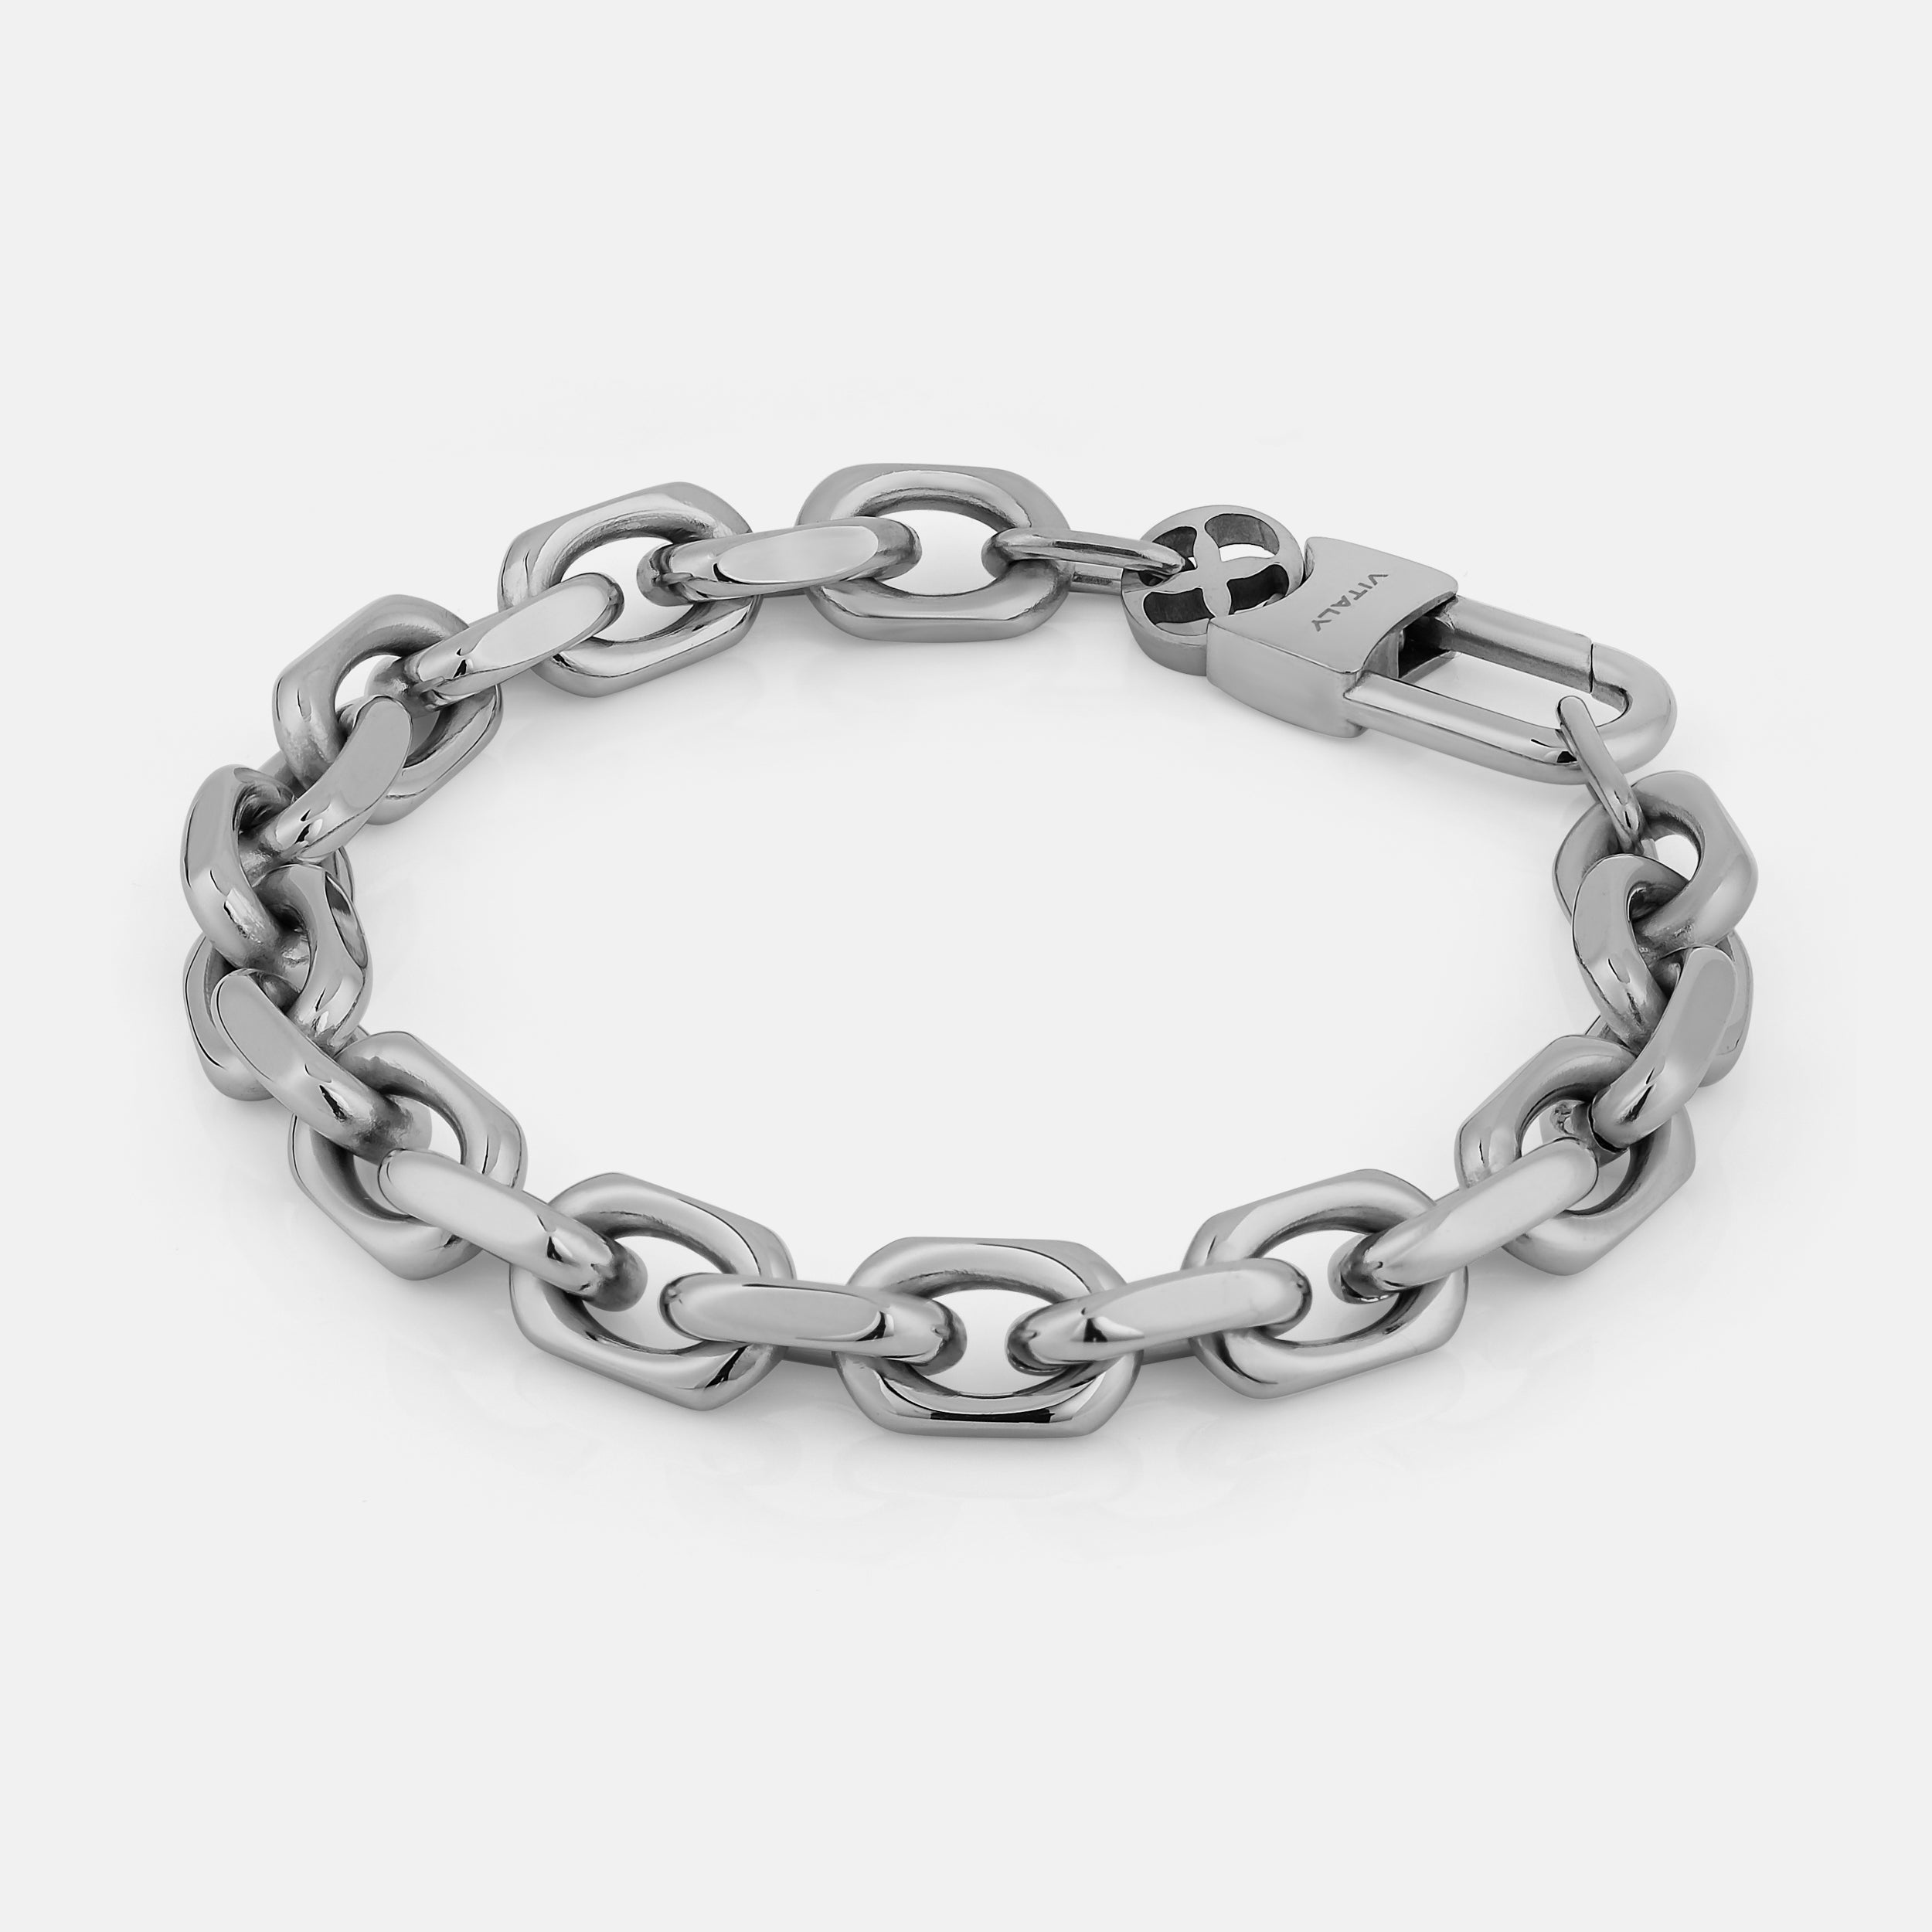 Vitaly Zero Choker Chain | 100% Recycled Stainless Steel Accessories